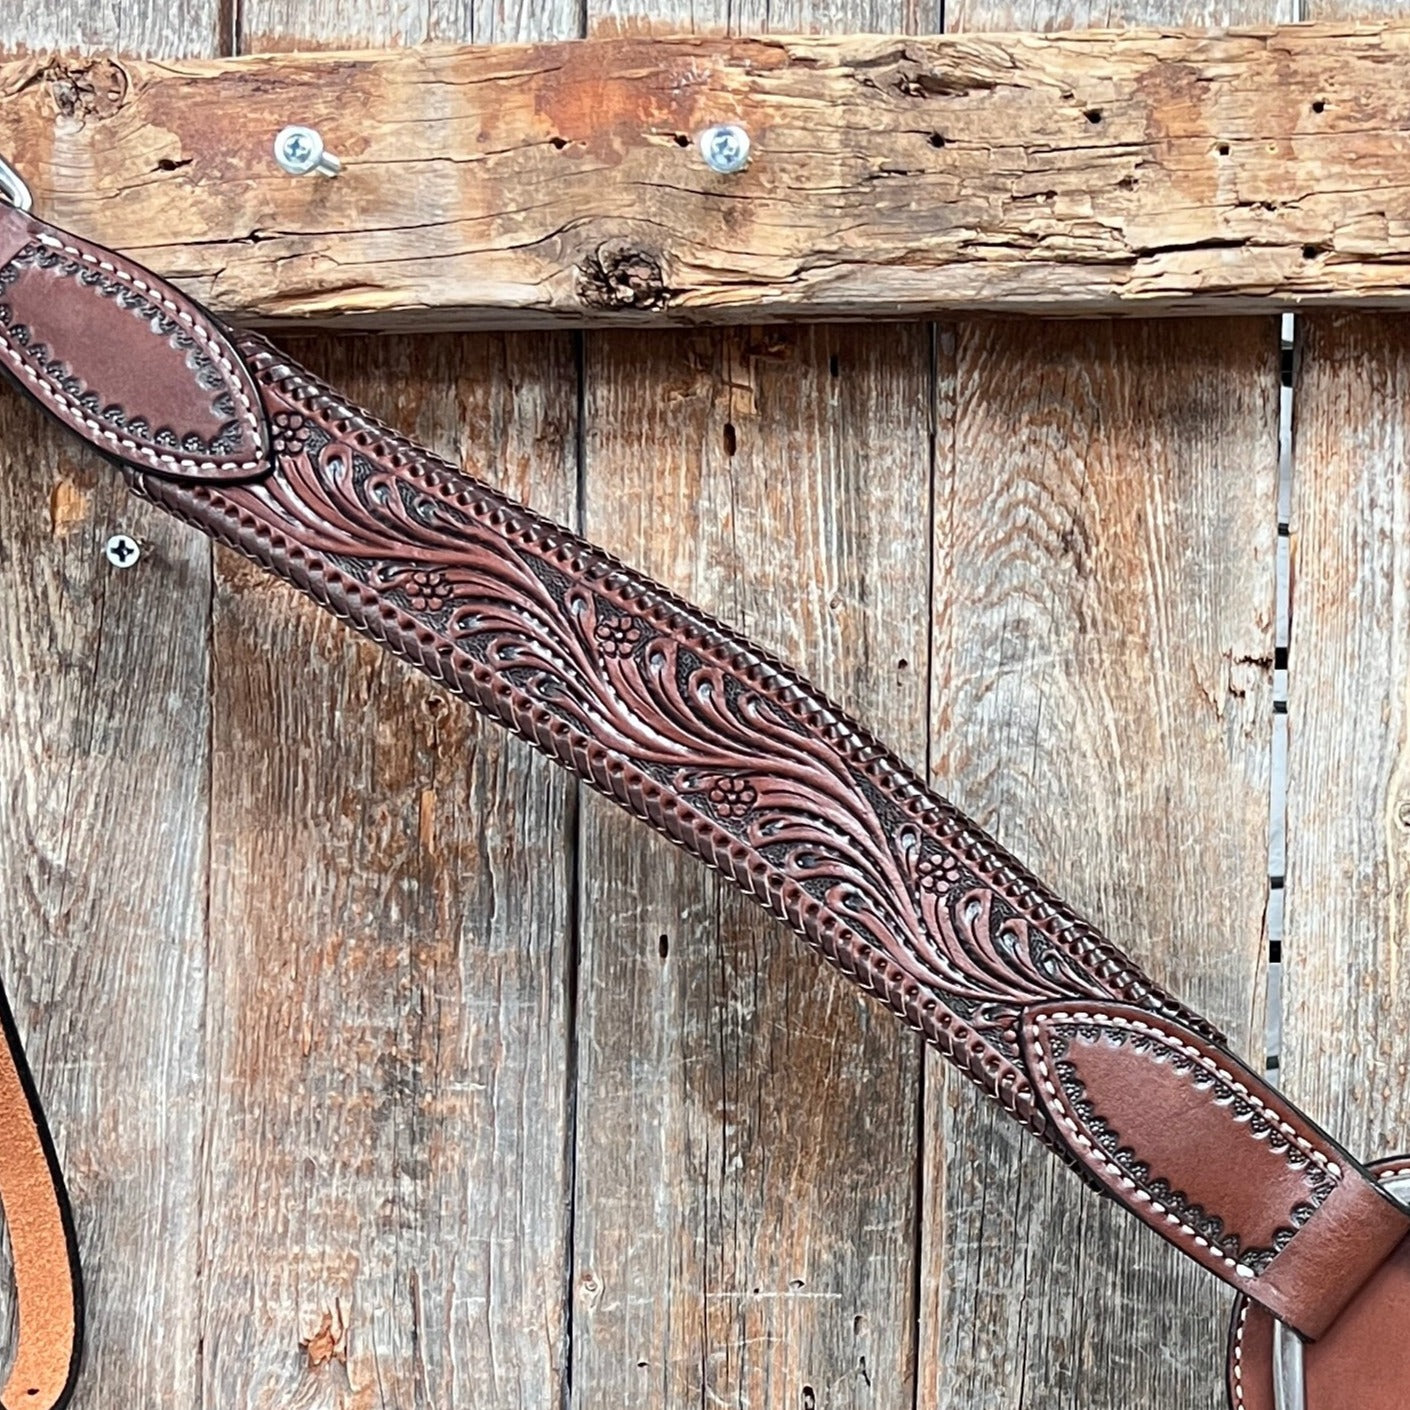 Dark Oil Braided Browband/One Ear Breastcollar Tack Sets